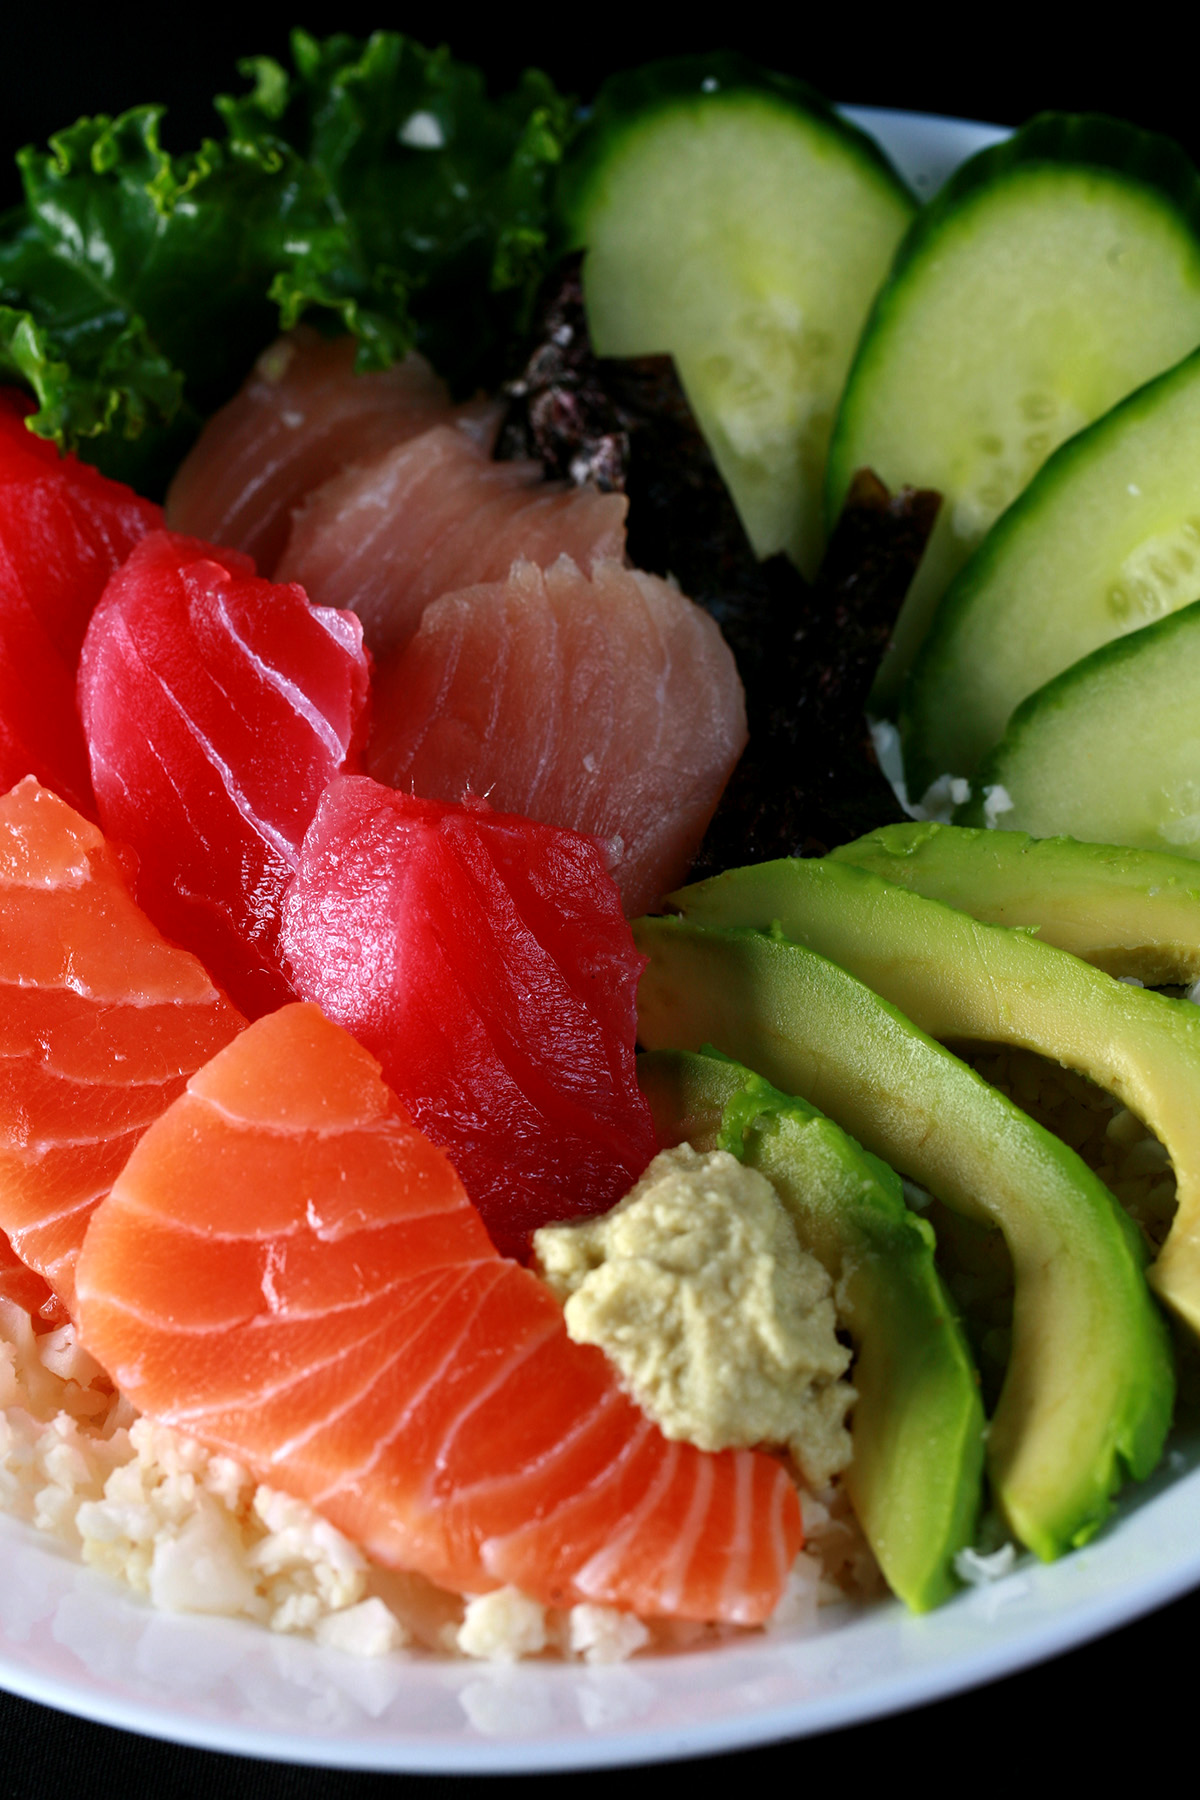 A keto chirashi bowl - A shallow bowl with various cuts of fish - salmon, tuna, and snapper - as well as some veggies. It is all arranged on top of riced cauliflower.